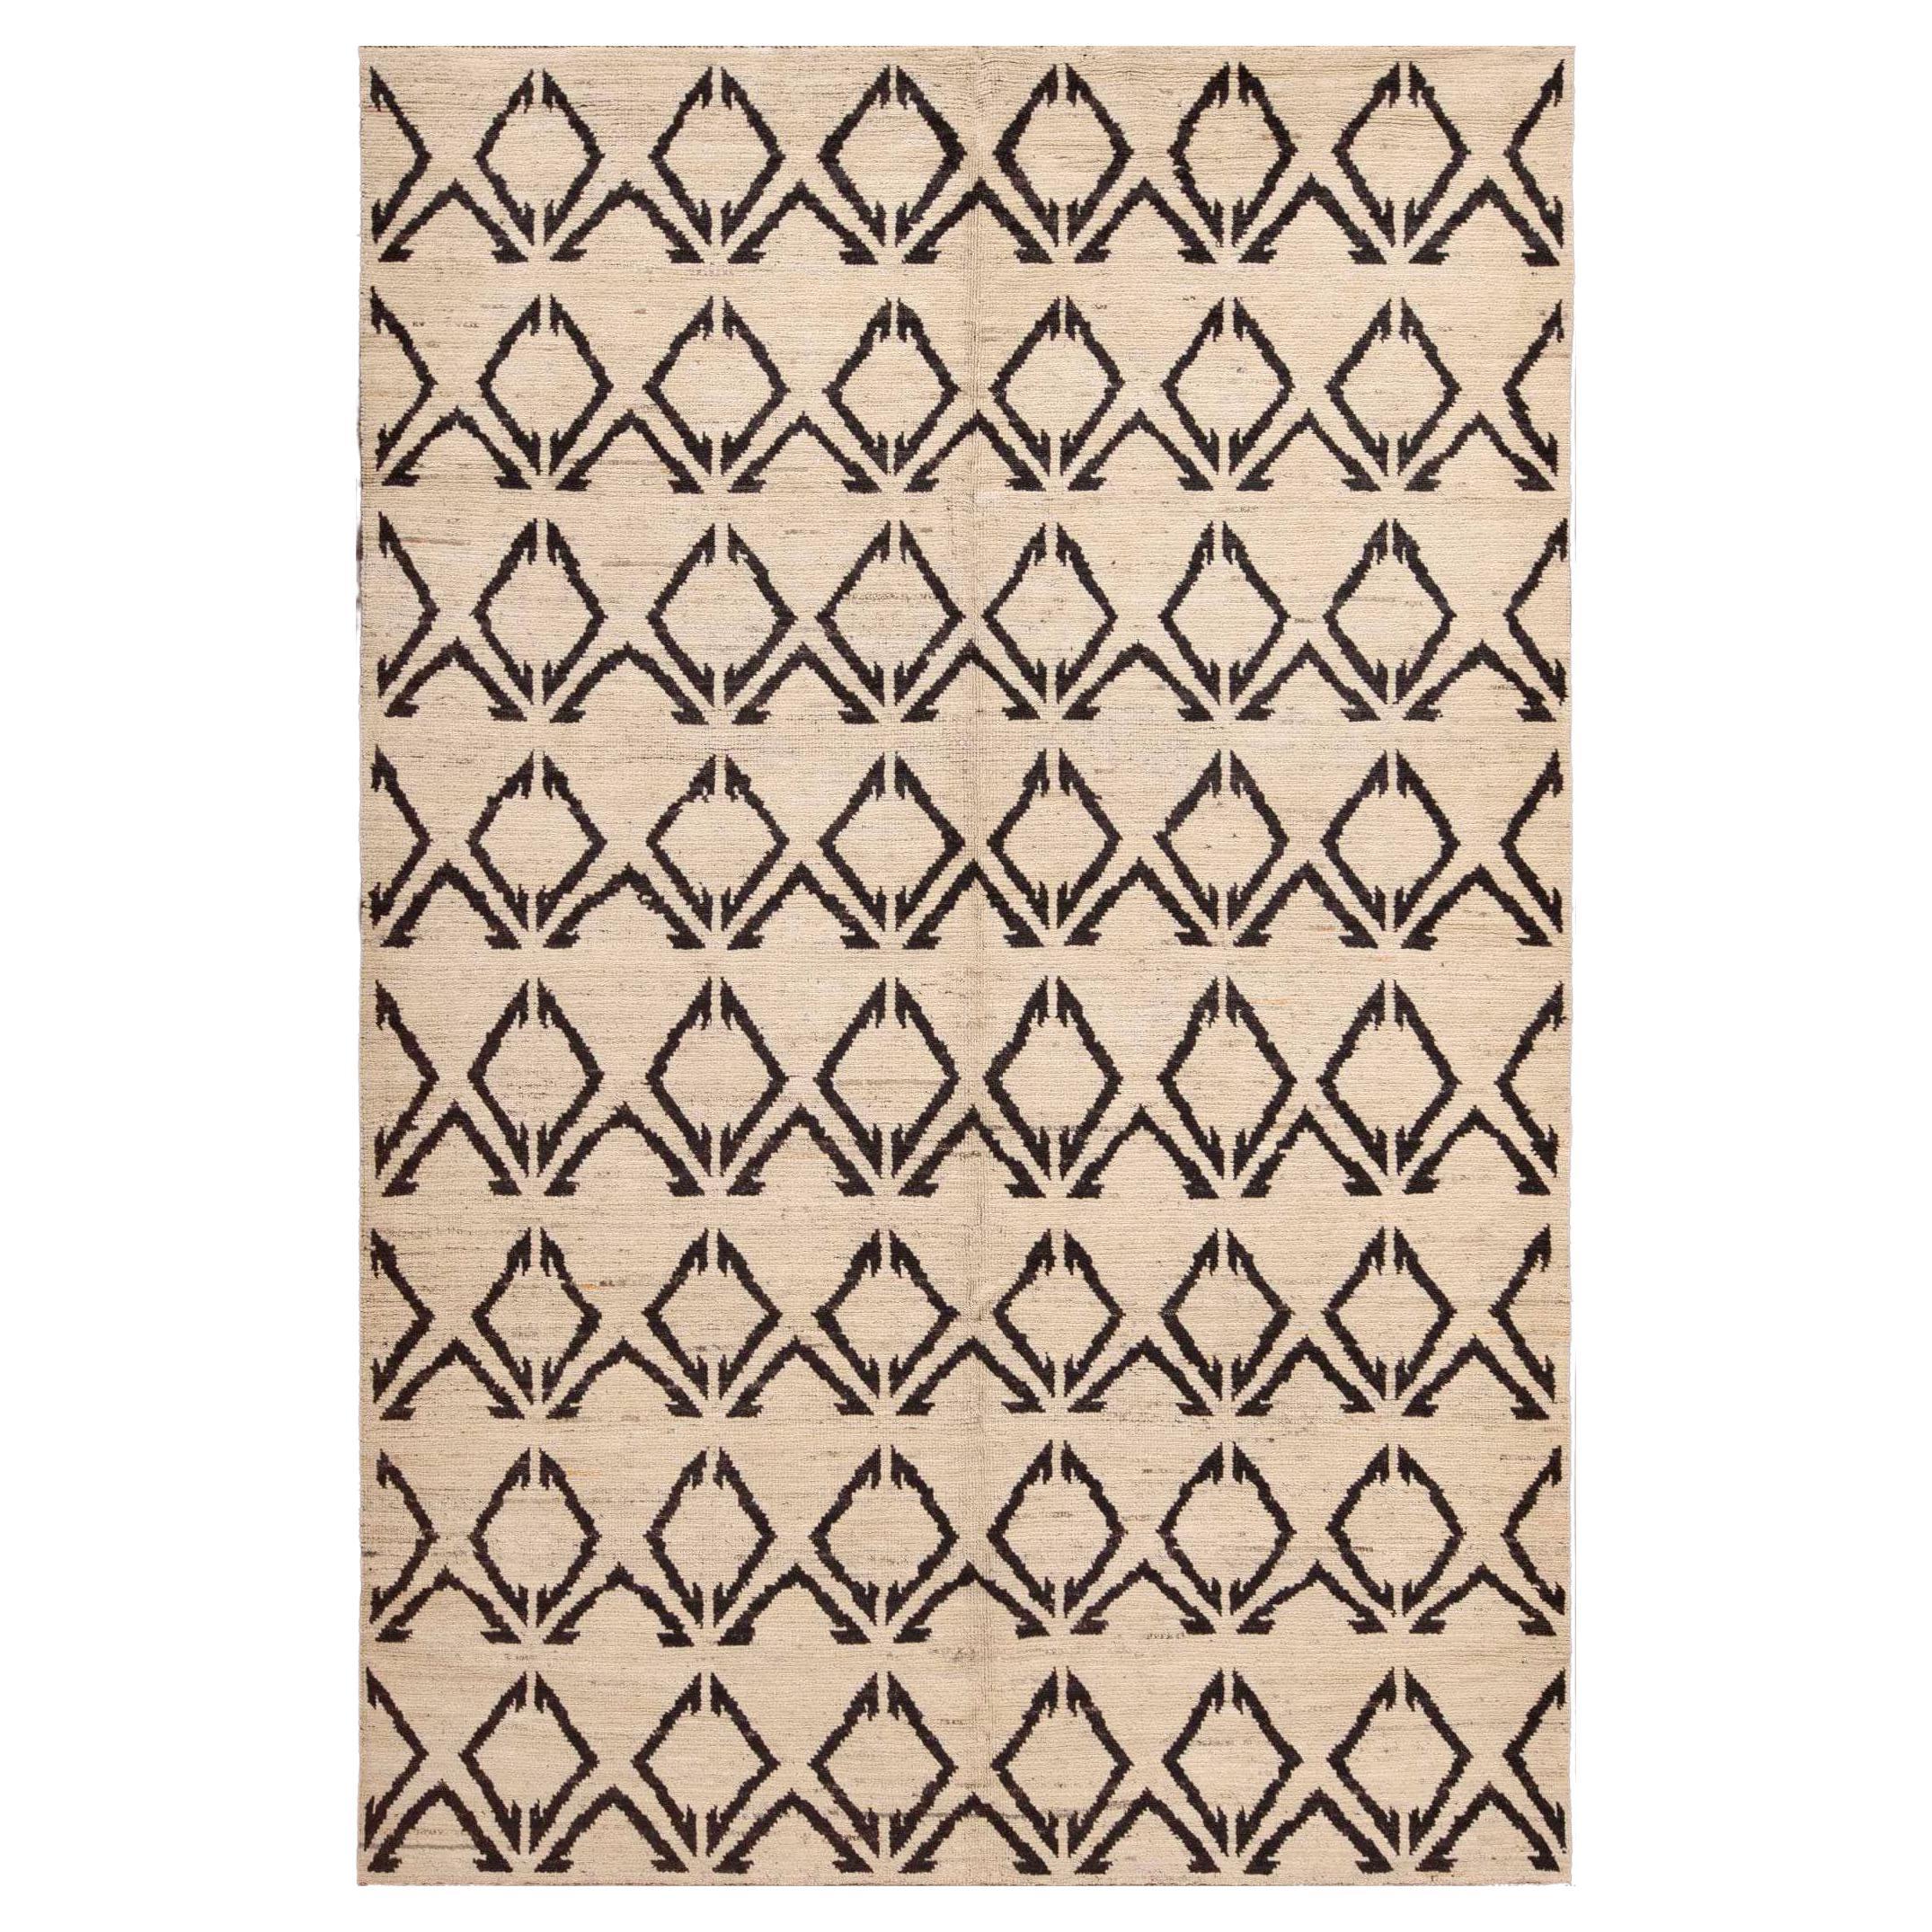 The Collective Bold Charcoal Tribal Geometric Modern Area Rug 6'4" x 9'5" (tapis de sol)